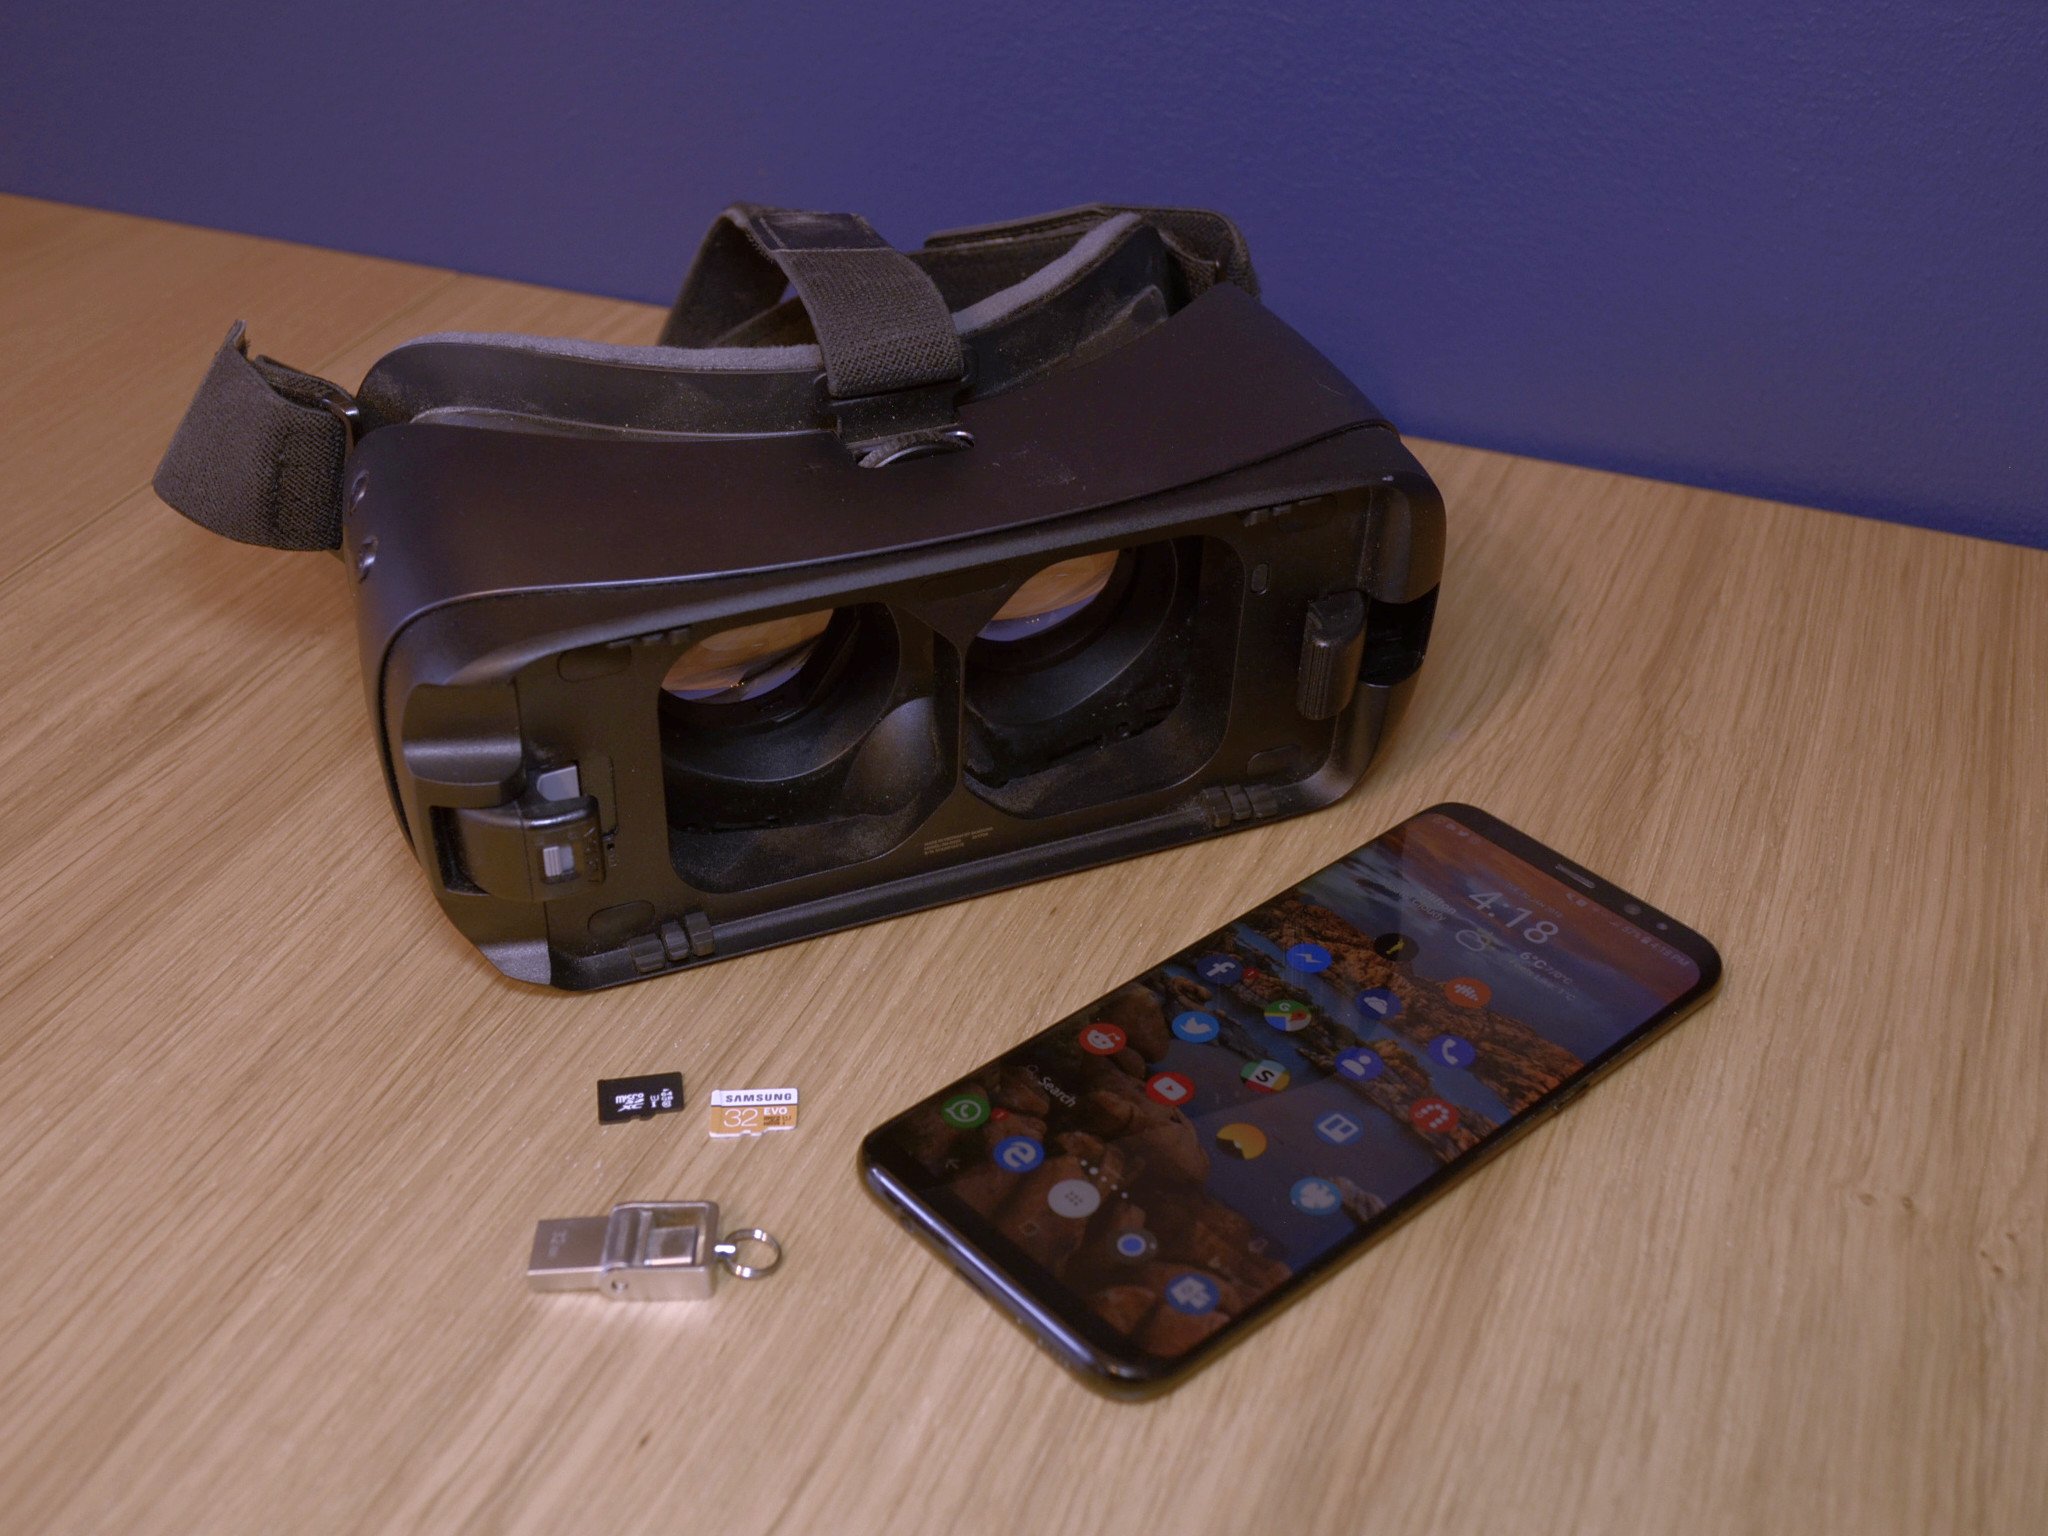 Best Storage Options for Gear VR